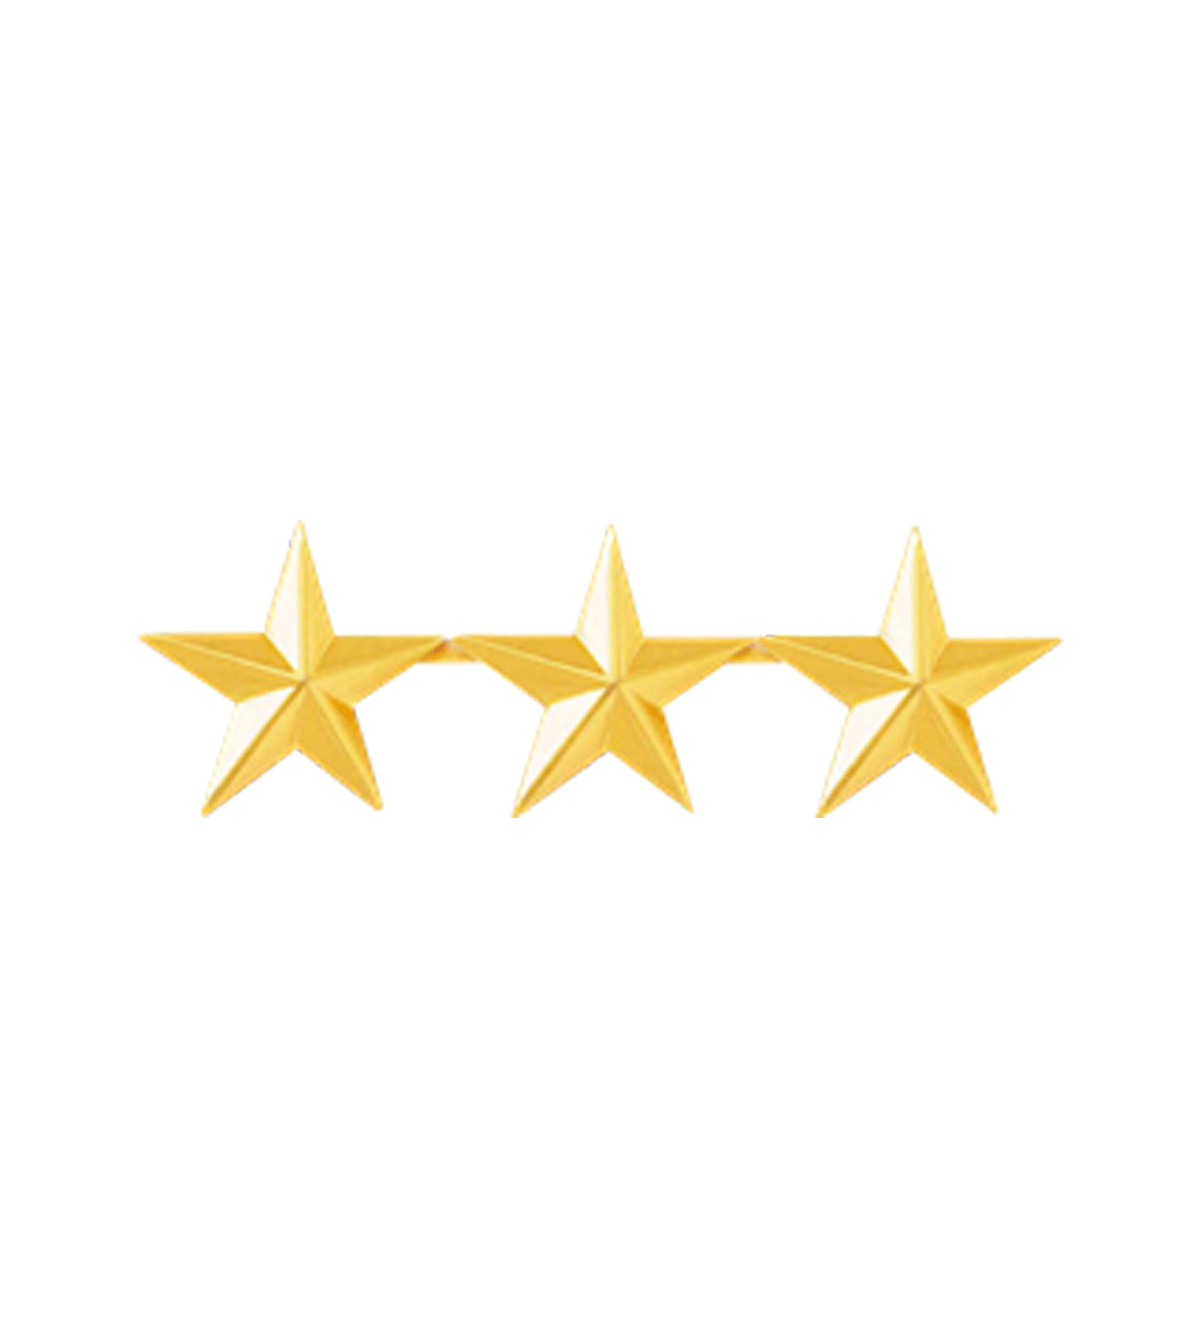 https://copsproducts.com/wp-content/uploads/2019/10/Triple-Stars-Collar-Brass.png